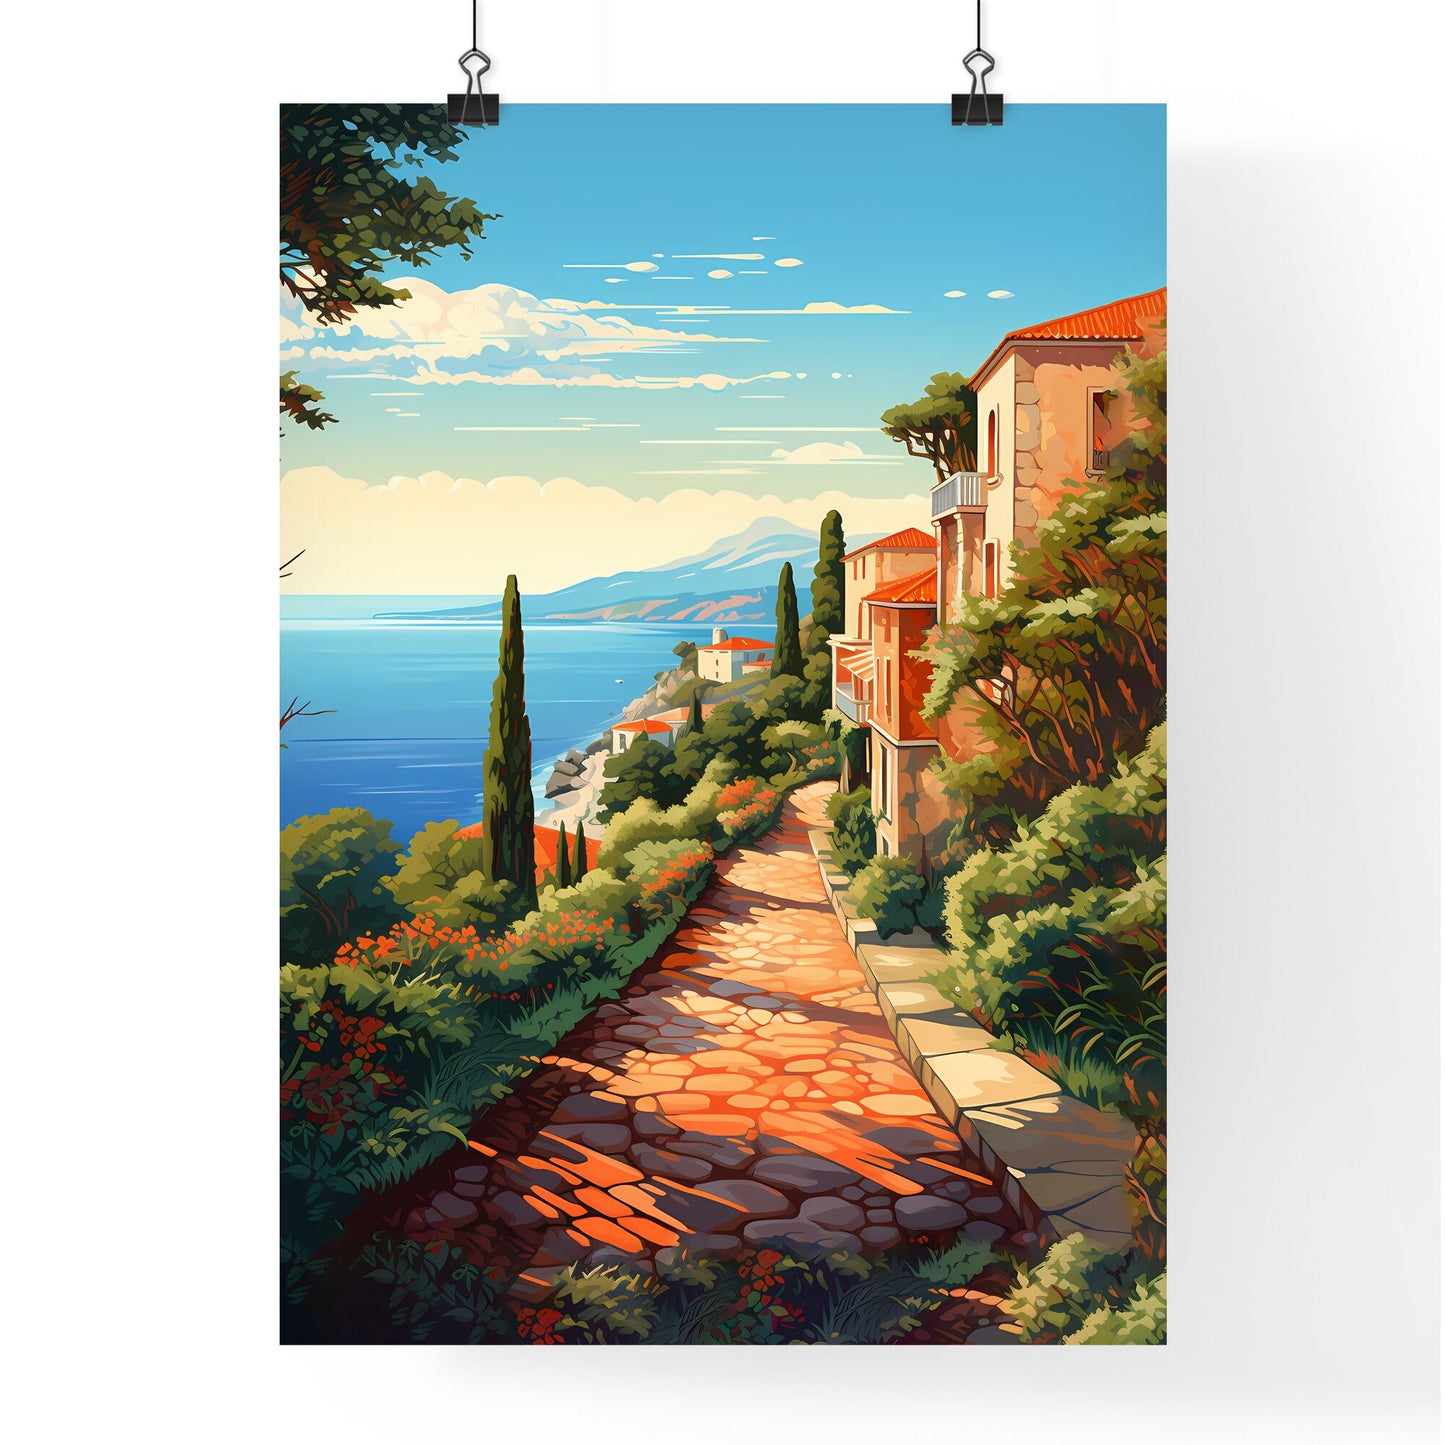 Stone Path With Trees And Buildings On The Side Of It Art Print Default Title